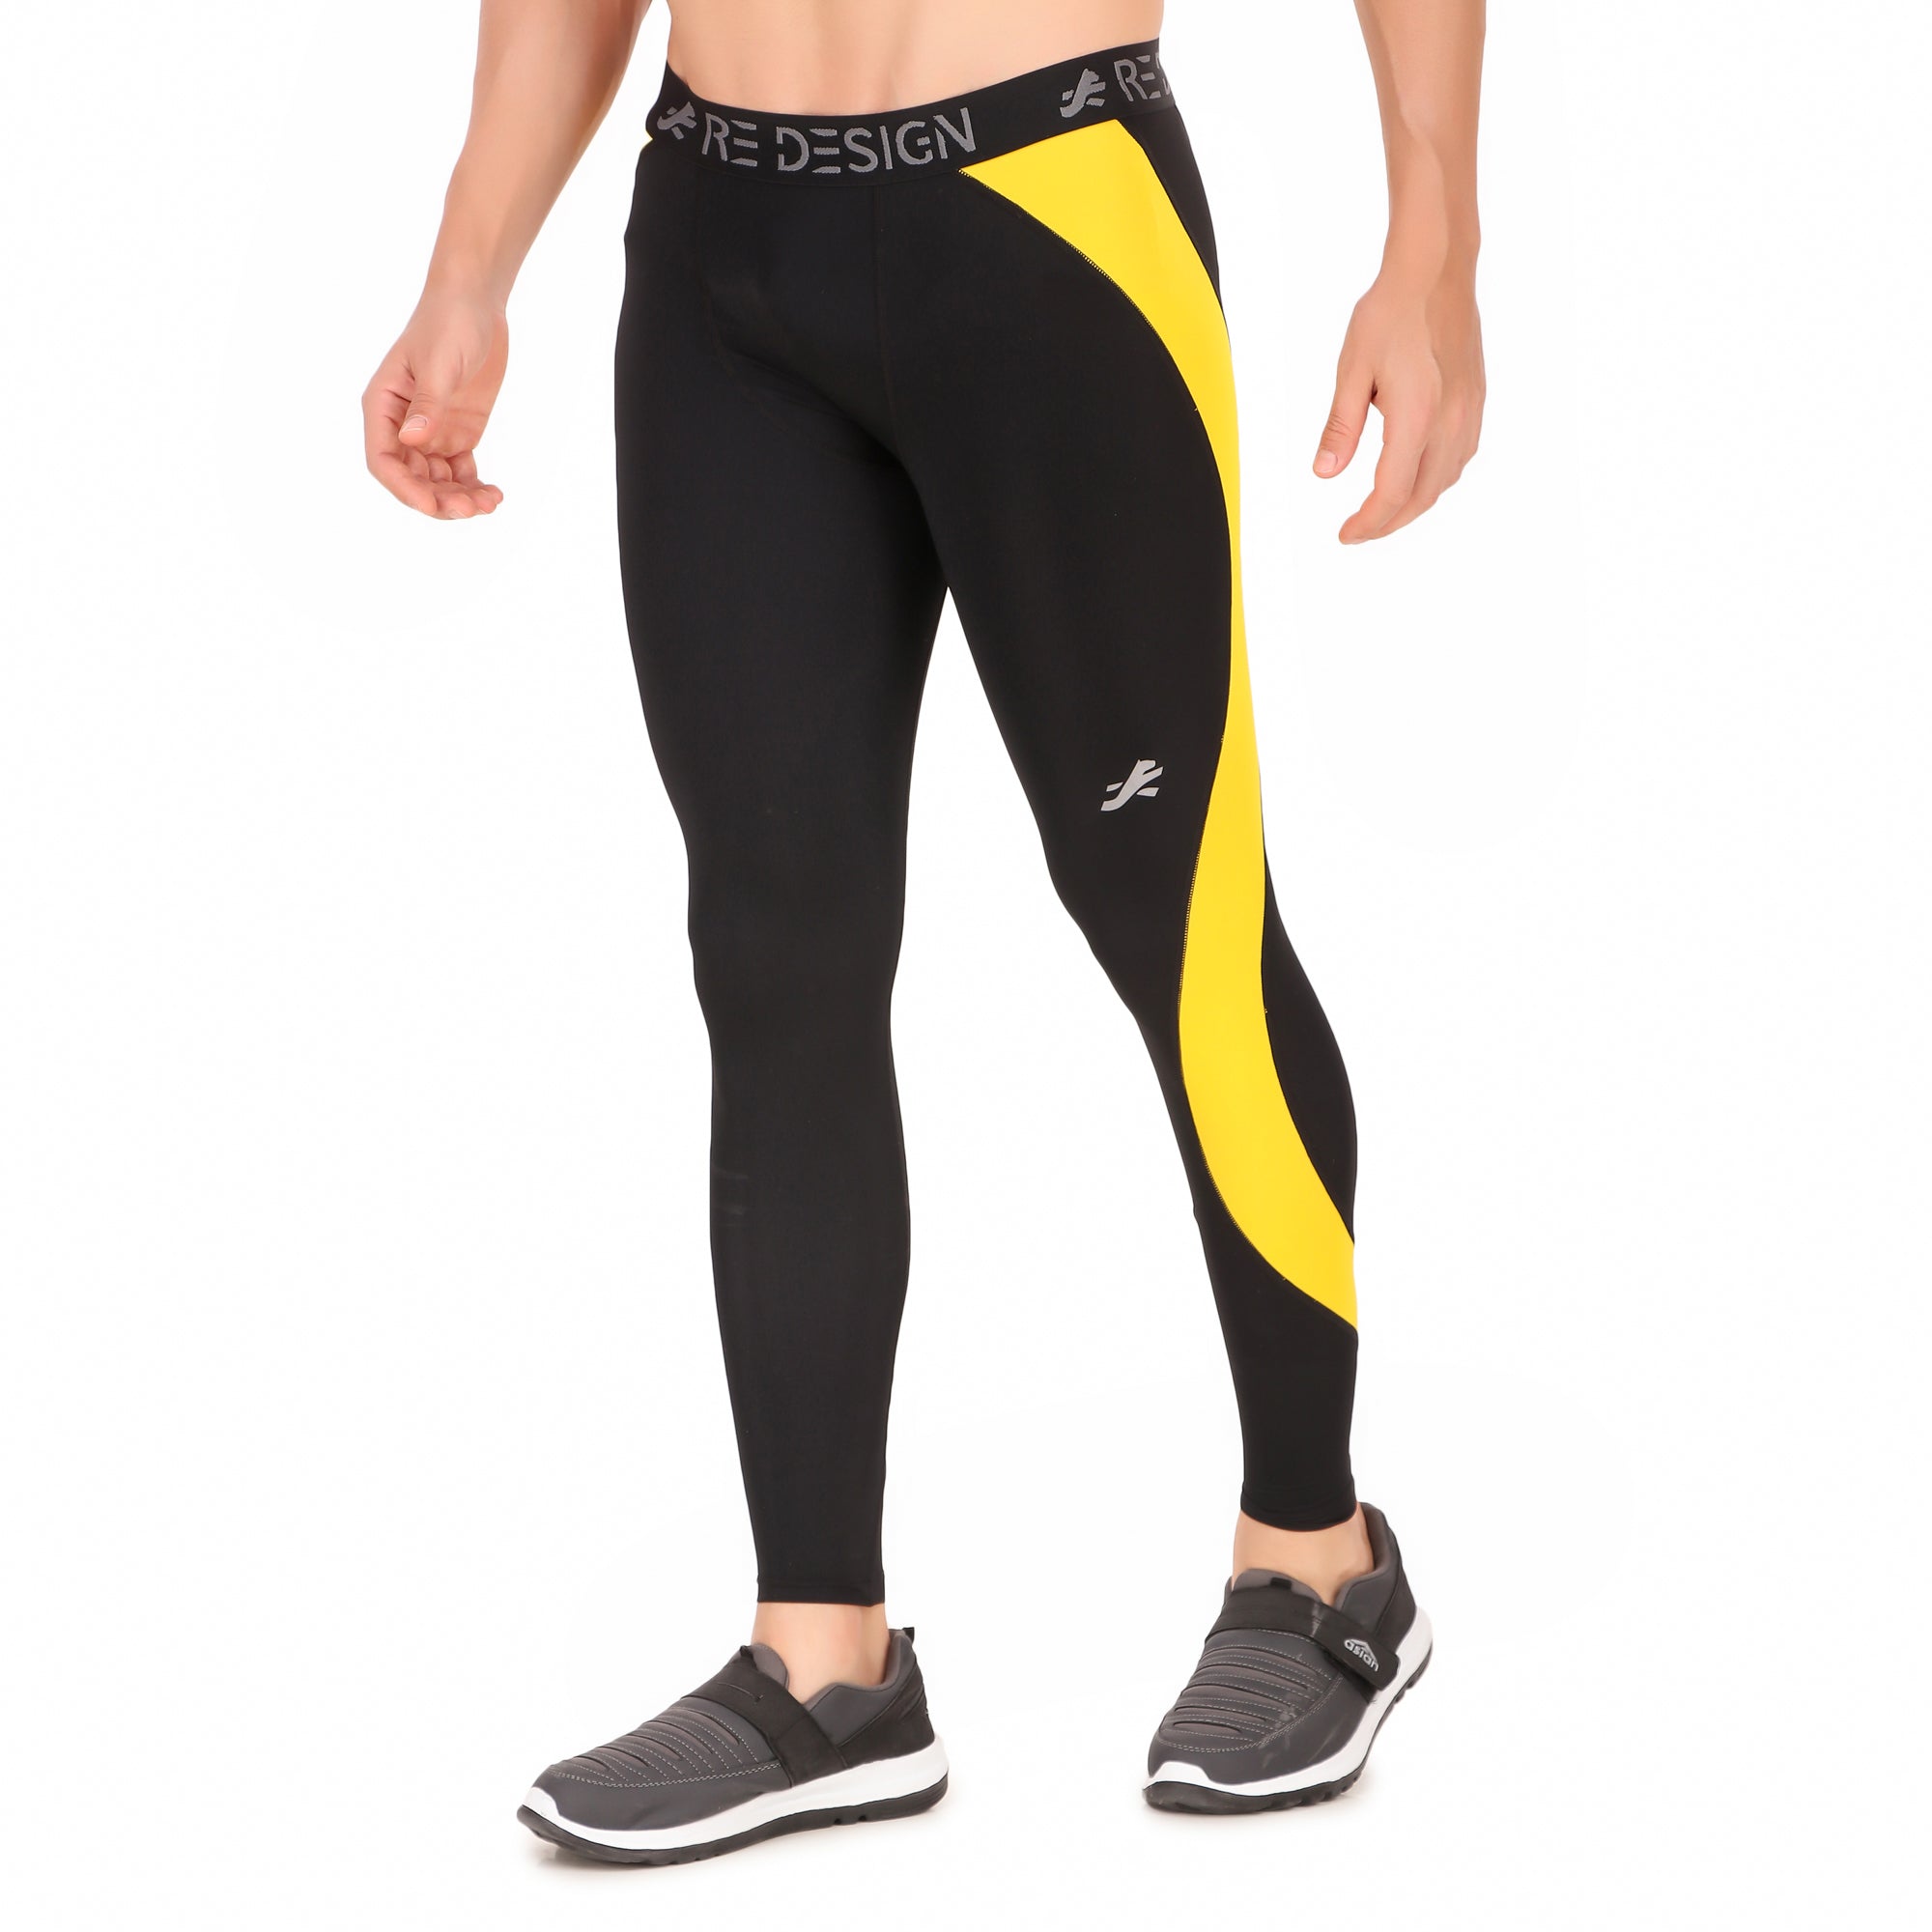 Men's Compression Pants Cool Dry Athletic India